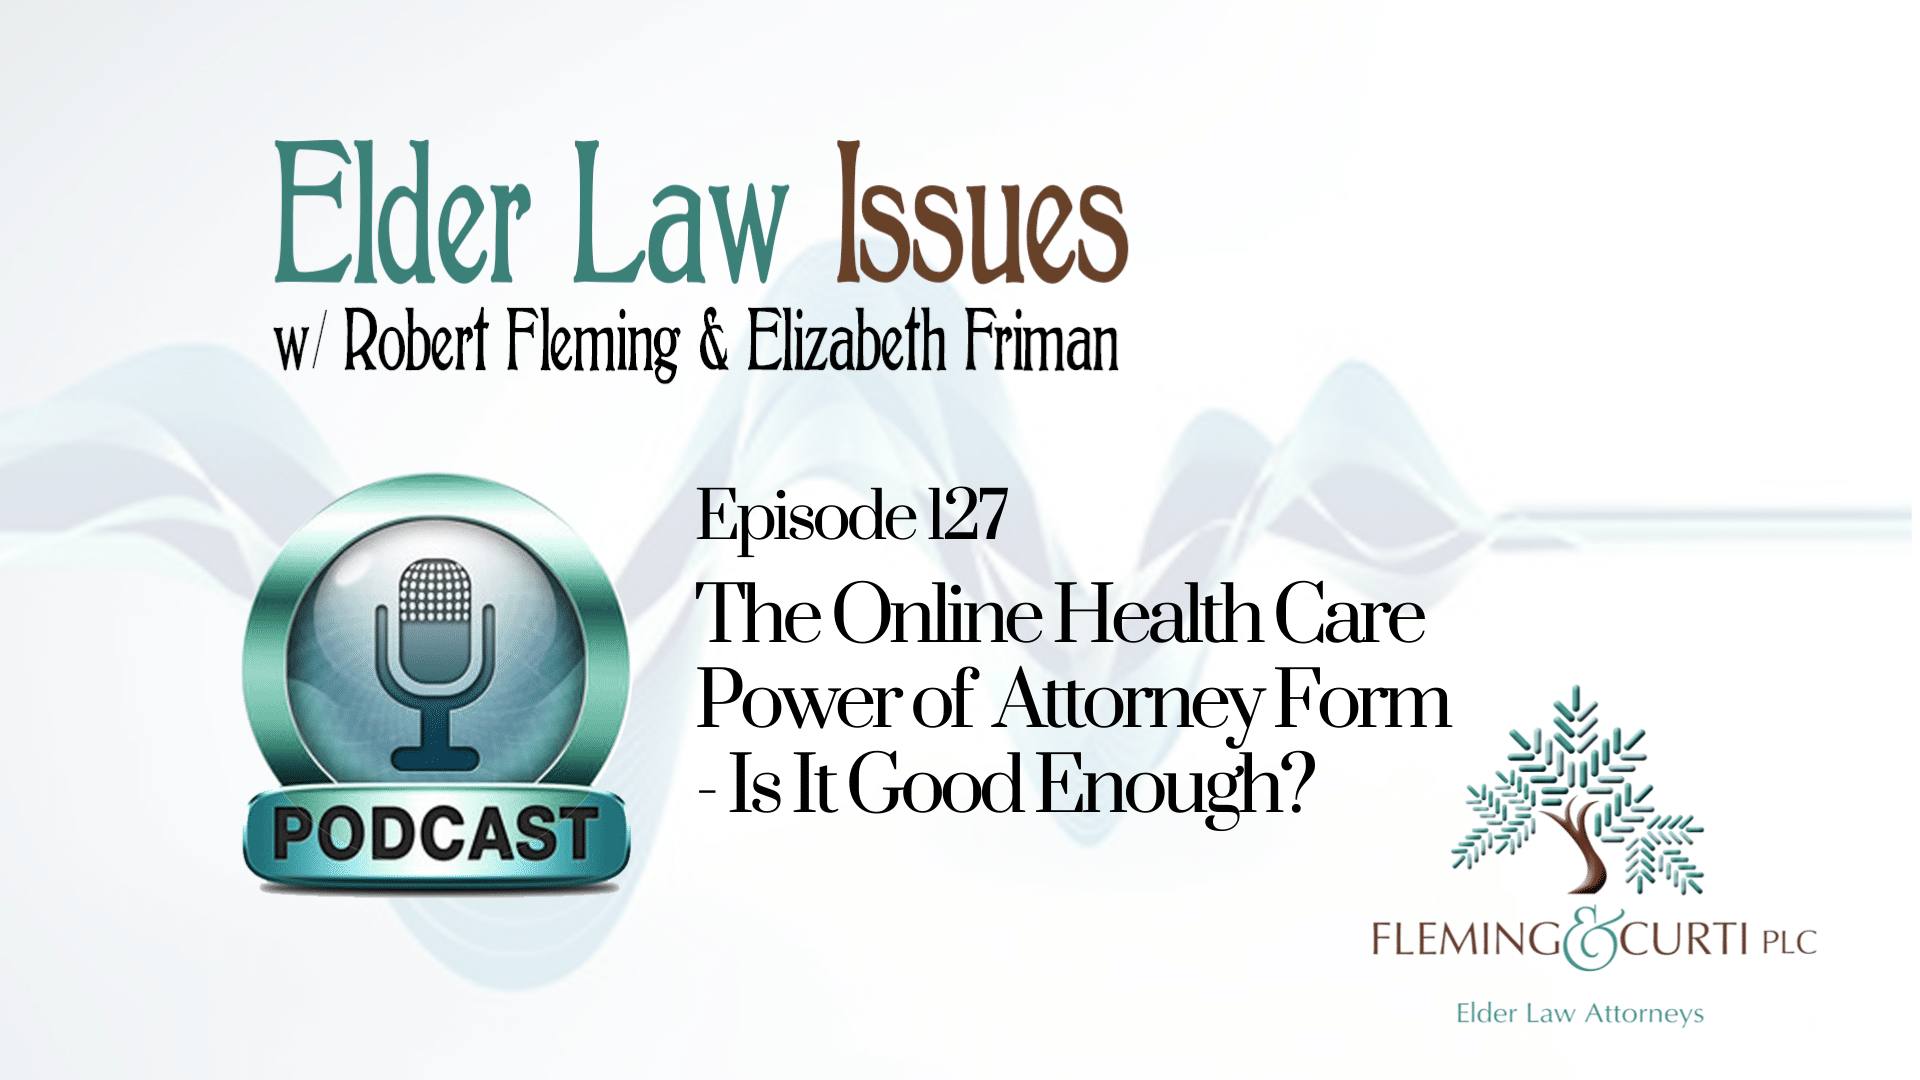 Online health care power of attorney